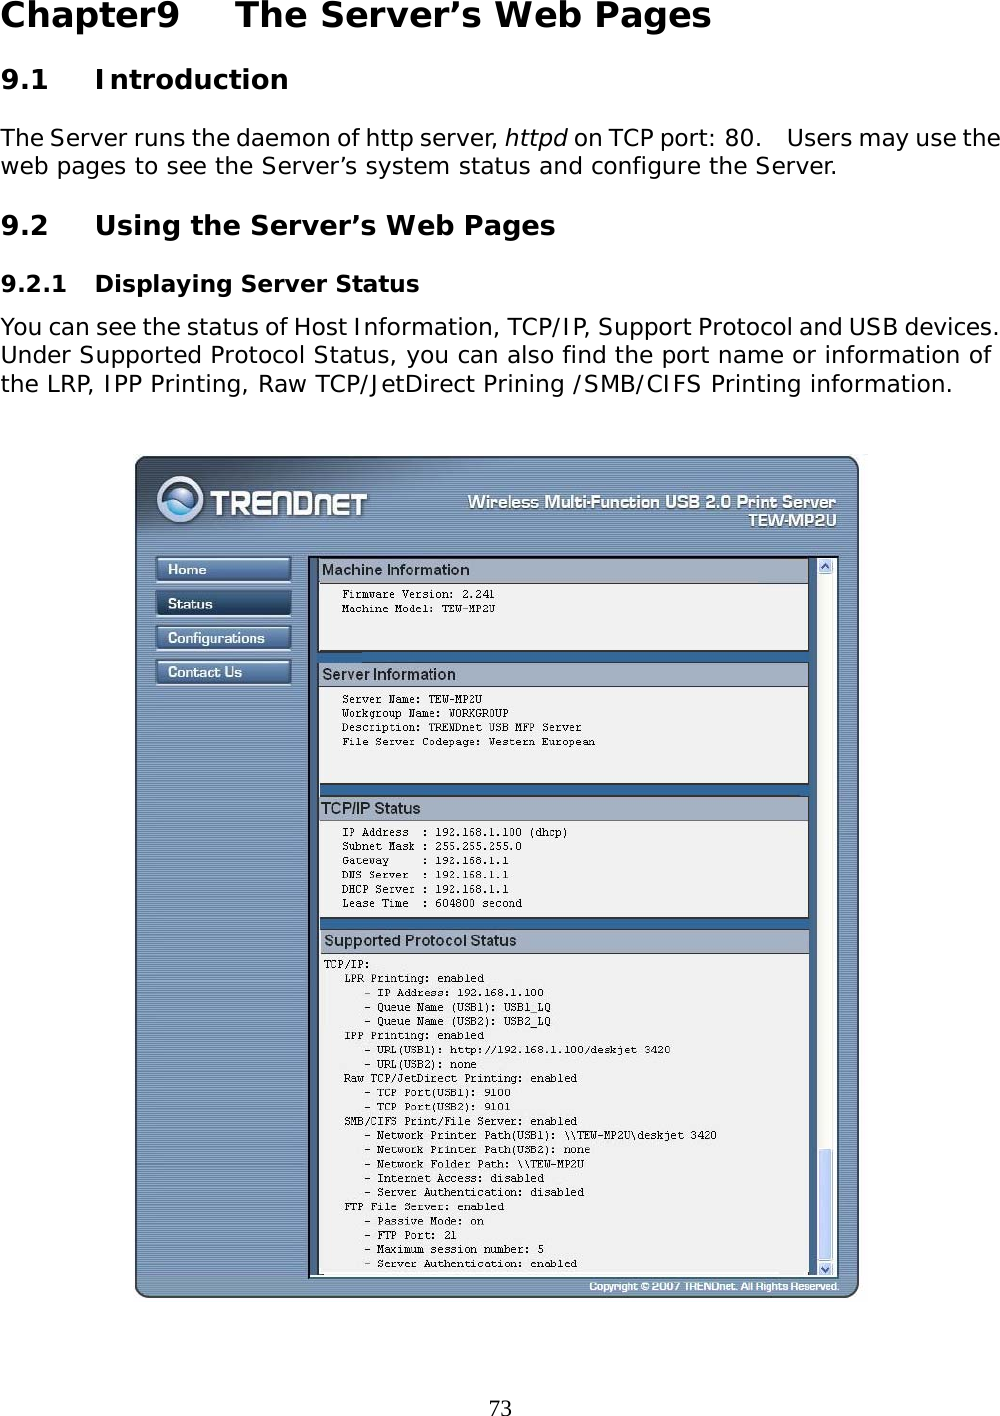     73 Chapter9   The Server’s Web Pages   9.1 Introduction  The Server runs the daemon of http server, httpd on TCP port: 80.    Users may use the web pages to see the Server’s system status and configure the Server.  9.2  Using the Server’s Web Pages  9.2.1  Displaying Server Status You can see the status of Host Information, TCP/IP, Support Protocol and USB devices. Under Supported Protocol Status, you can also find the port name or information of the LRP, IPP Printing, Raw TCP/JetDirect Prining /SMB/CIFS Printing information.   